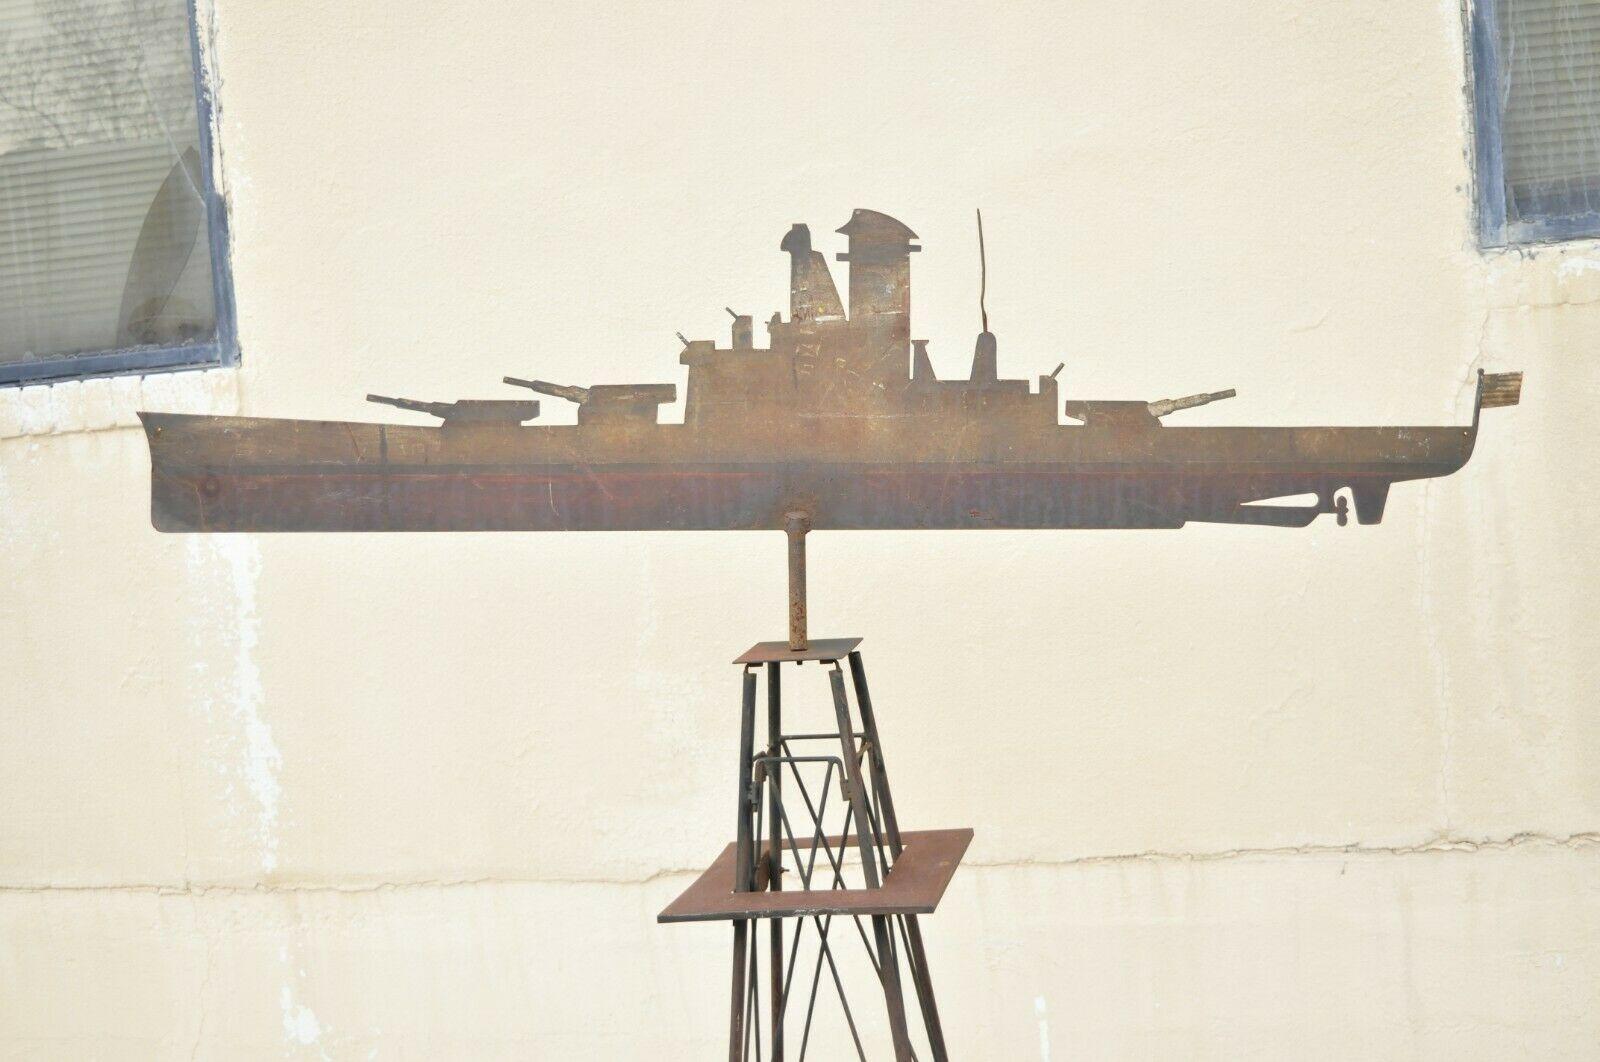 Antique battleship weather vane weathered paint American primitive steel metal. Item features hand made weathervane, distressed original paint , American flag to ship. Very nice antique item, quality American craftsmanship. Circa Early to Mid